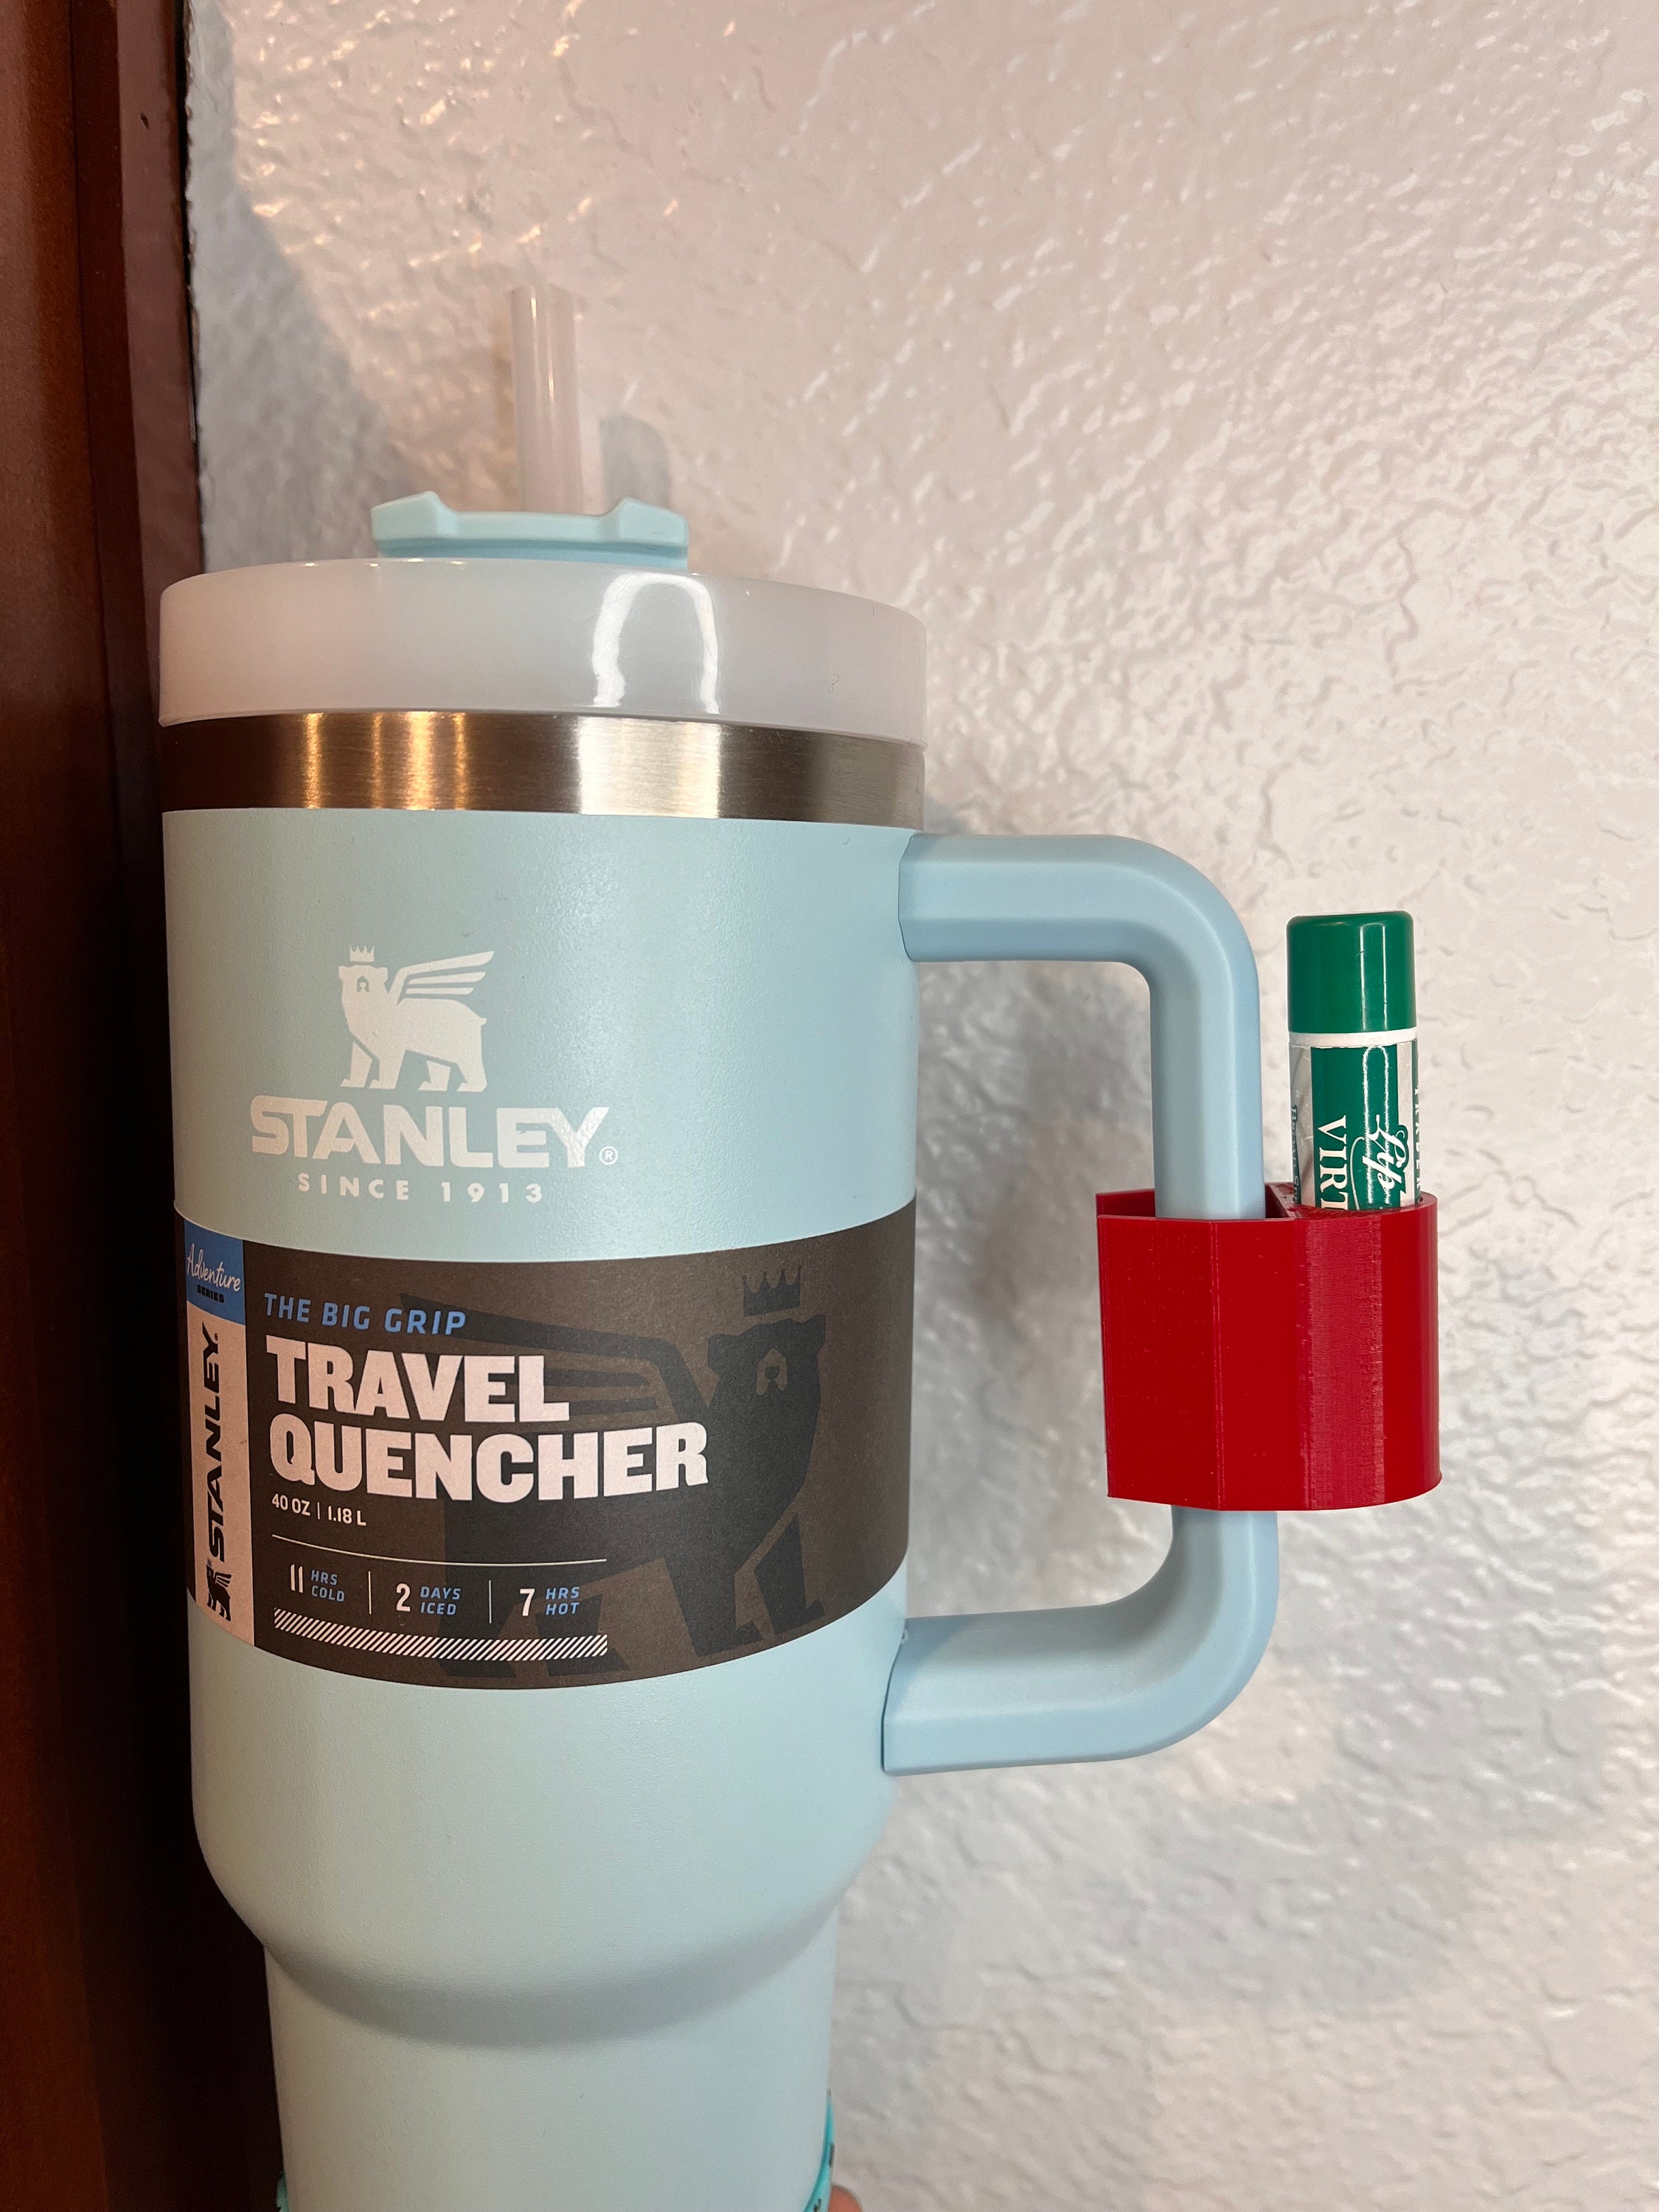 Stanley chapstick holder! Never lose your chapstick again